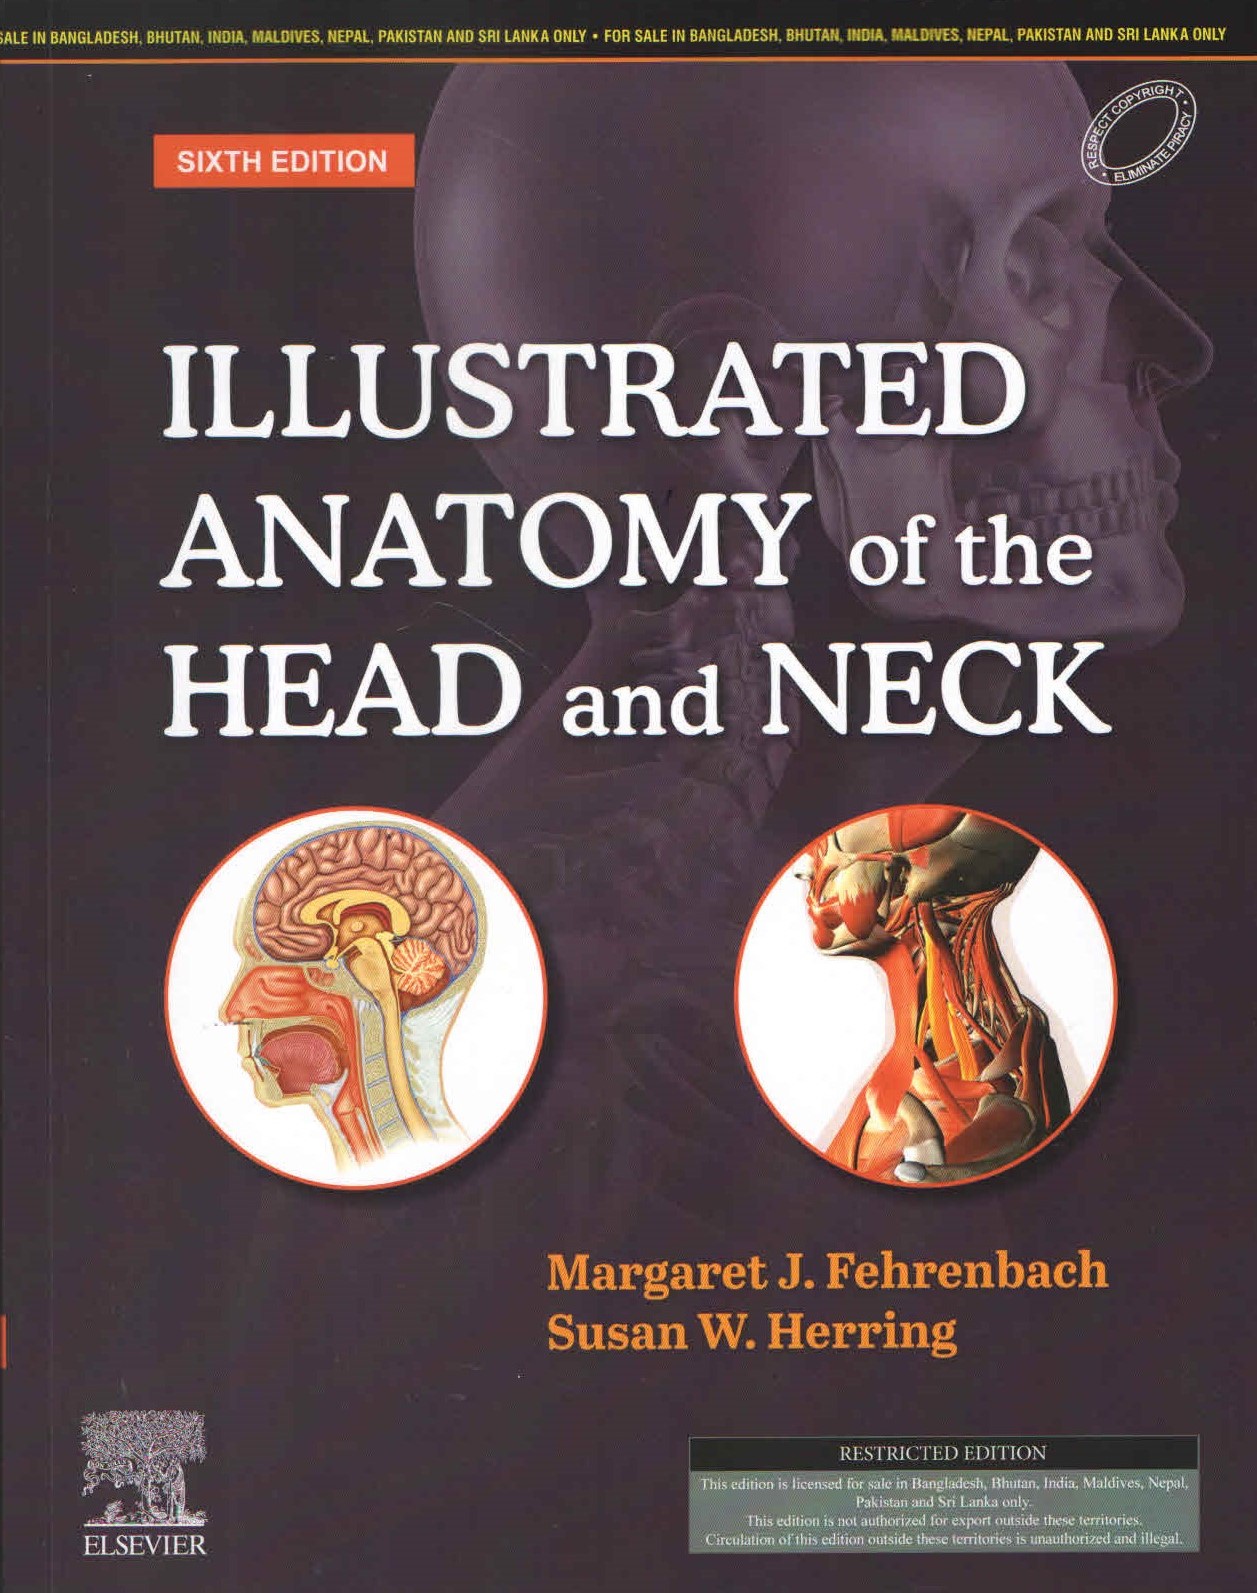 

exclusive-publishers/elsevier/illustrated-anatomy-of-the-head-and-neck-9788131269565